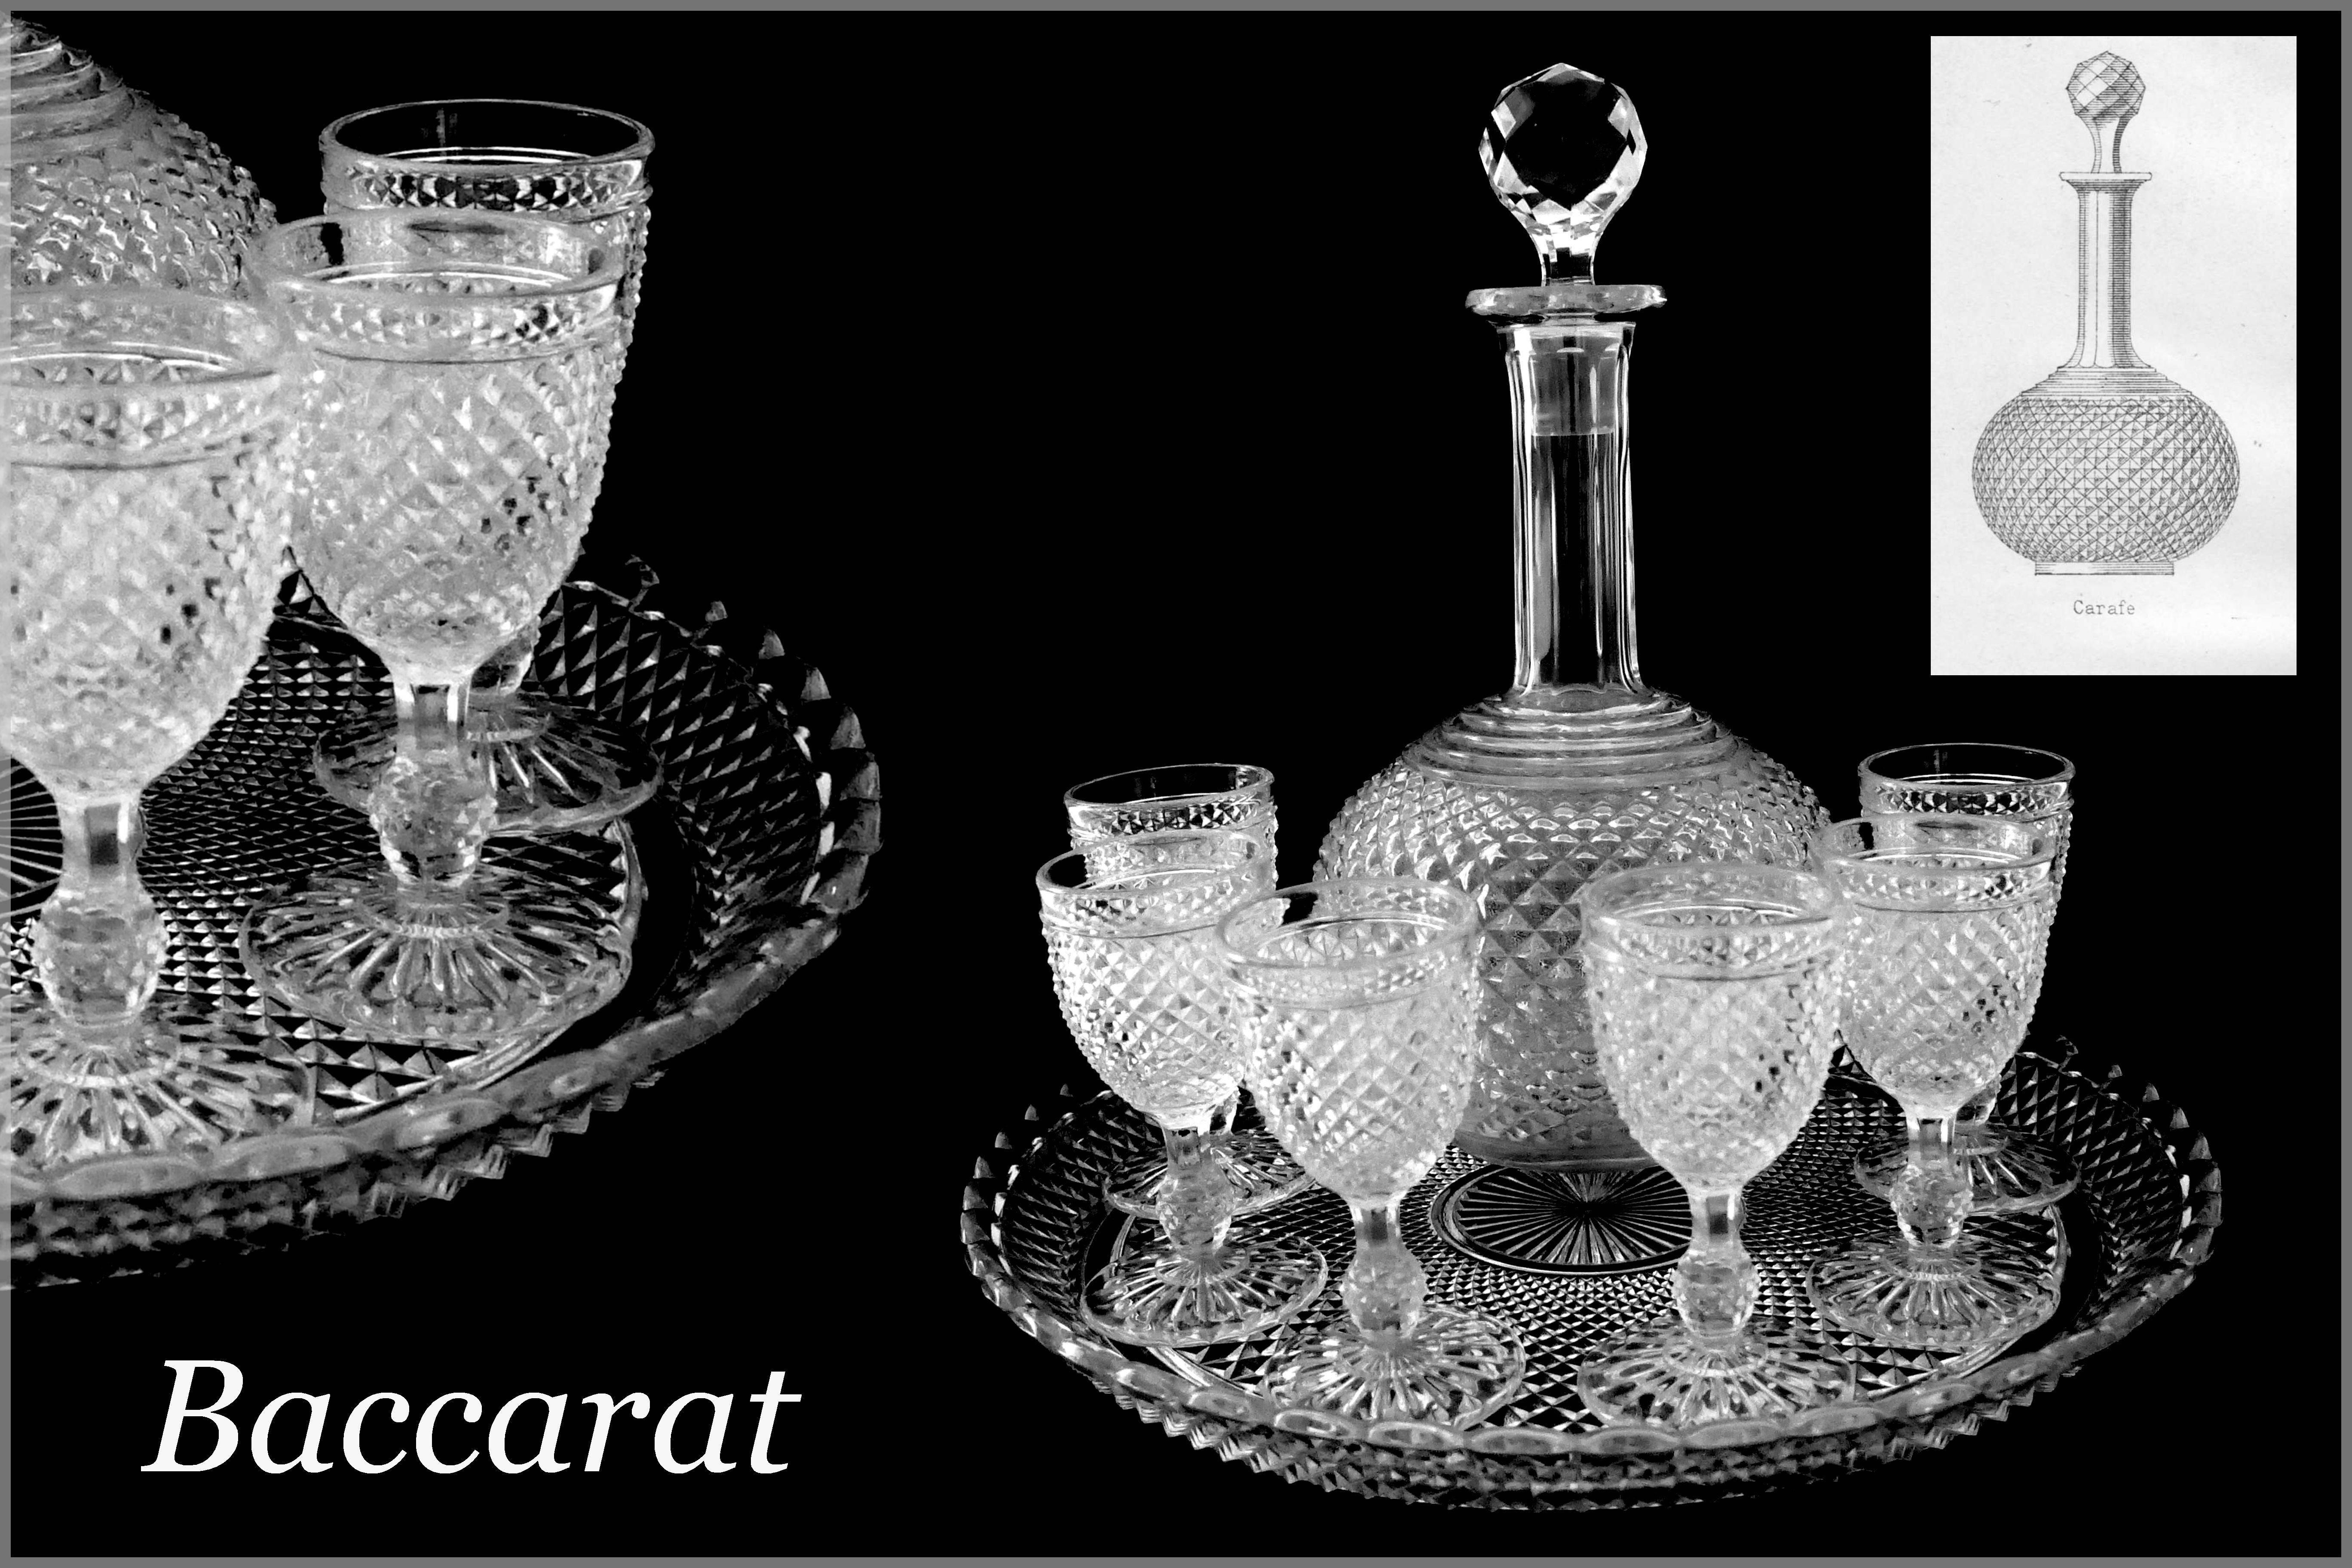 1900 rare Baccarat diamond cut-crystal liquor or aperitif service.

Rare Baccarat crystal liquor or aperitif service with diamond-point motifs comprising circular platter with laced border, six glasses and a decanter. This service is illustrated